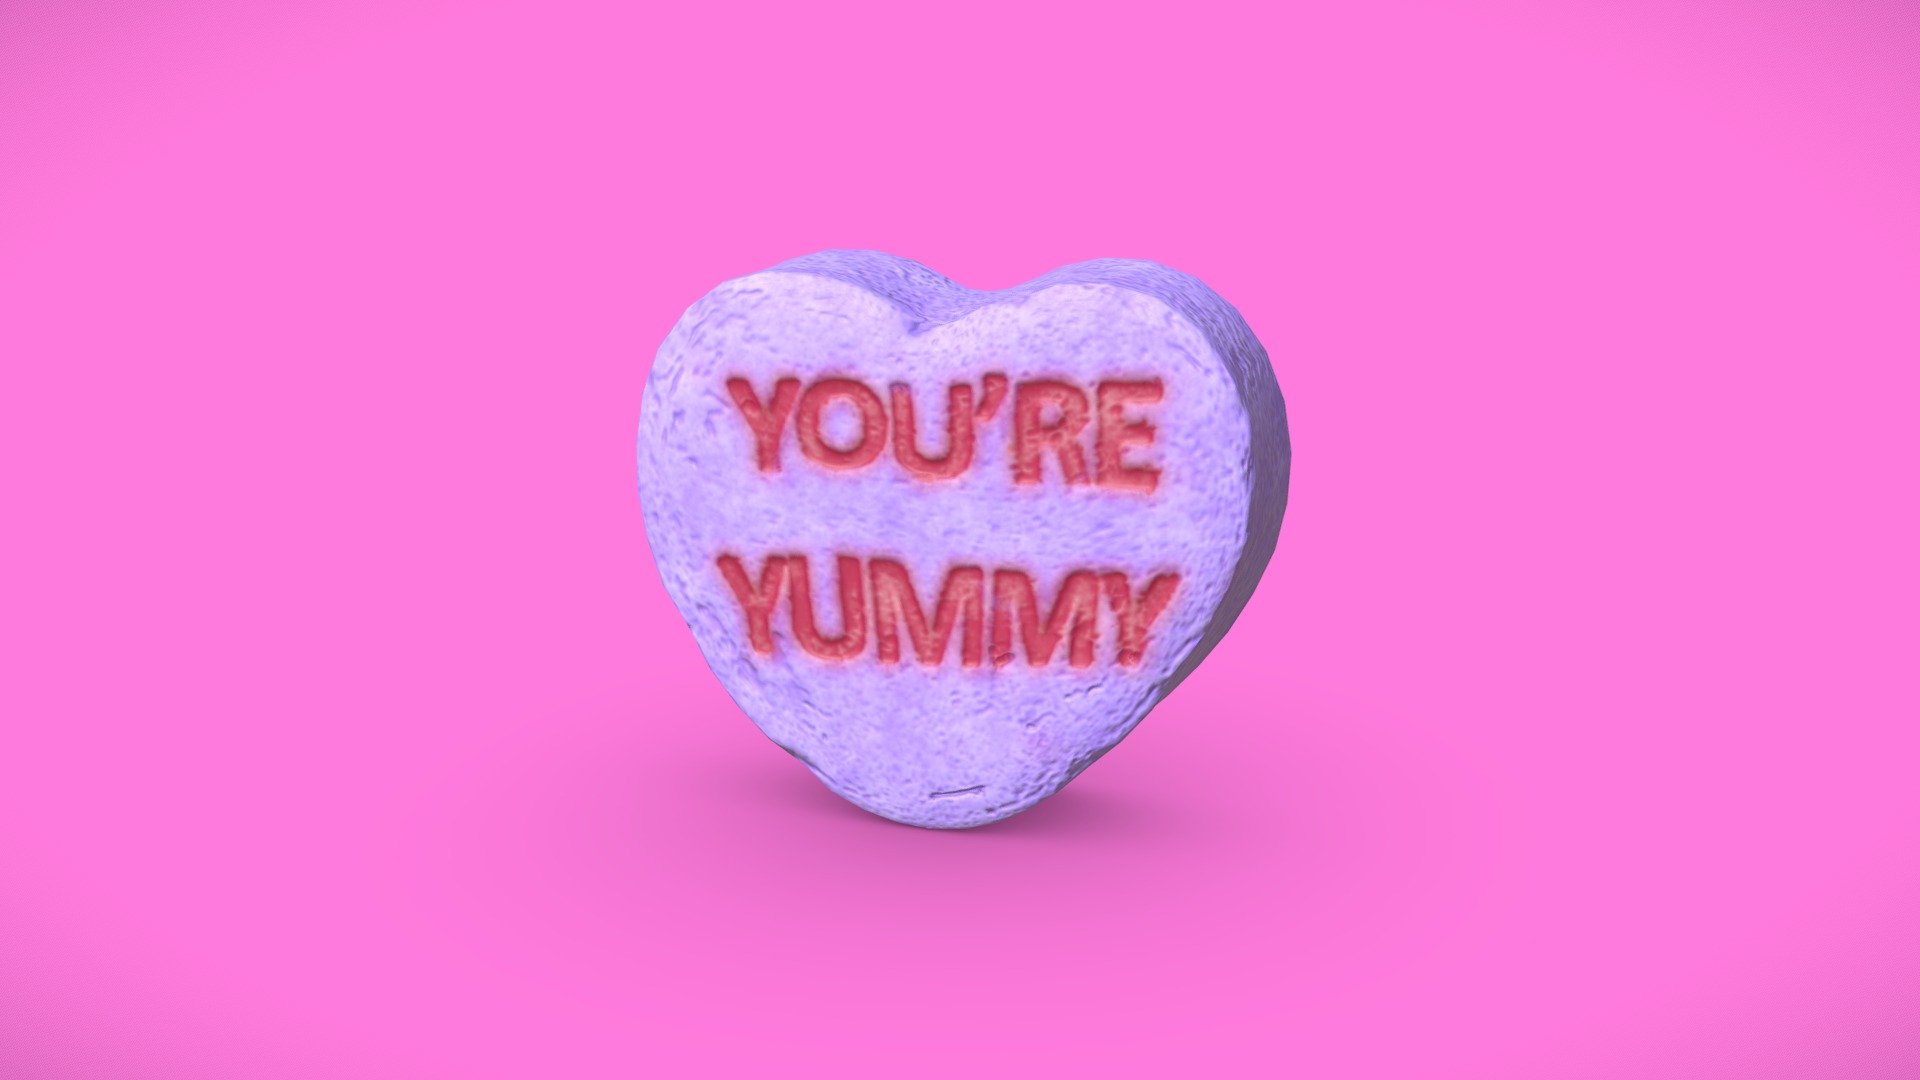 Heart Candy - You're Yummy